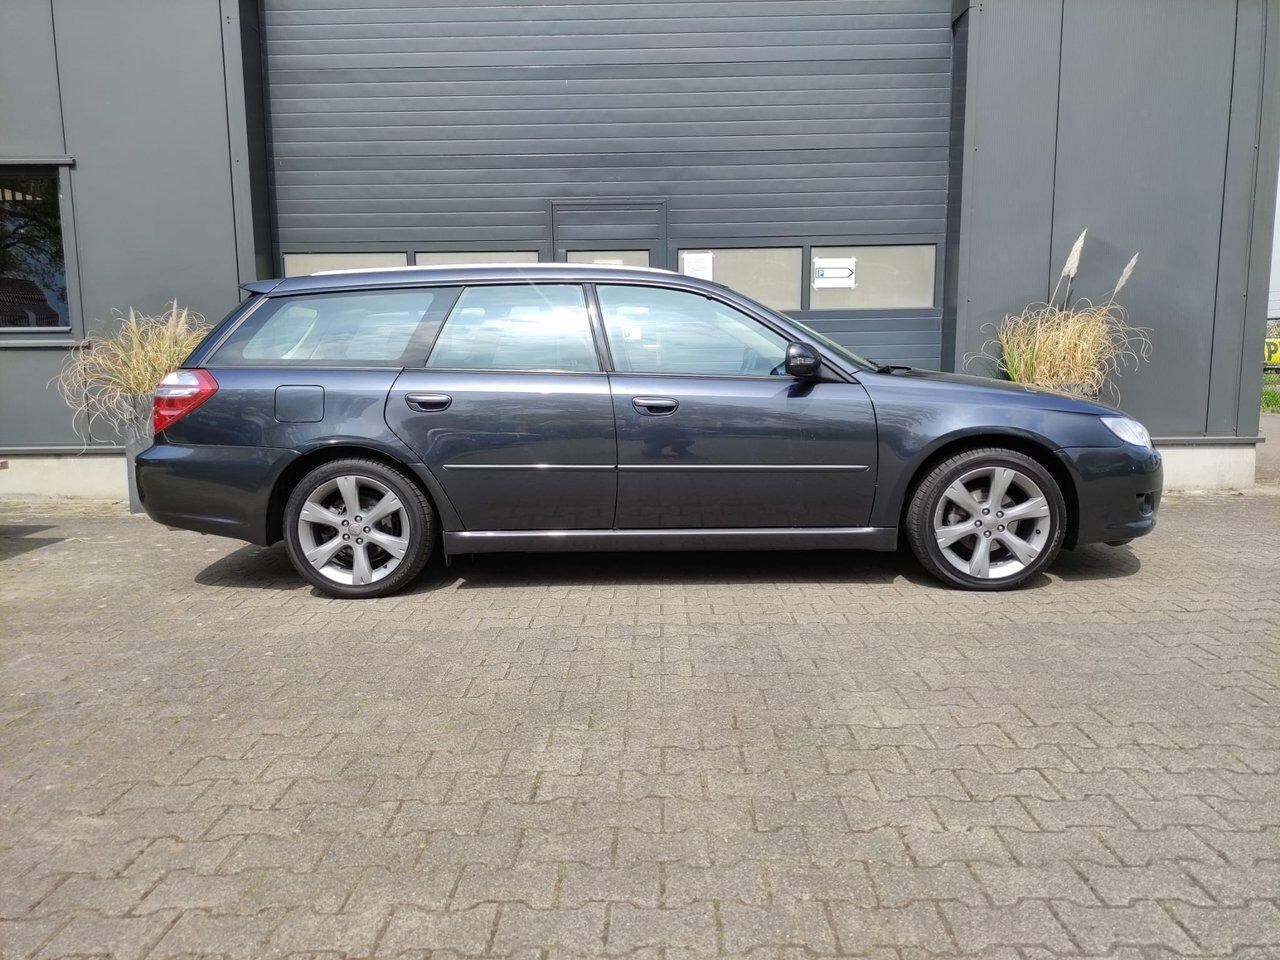 Subaru Legacy Touring Wagon - 2.0i Exclusive R. Edition AWD Low Gearing/ climate control/ cruise control/ trekhaak